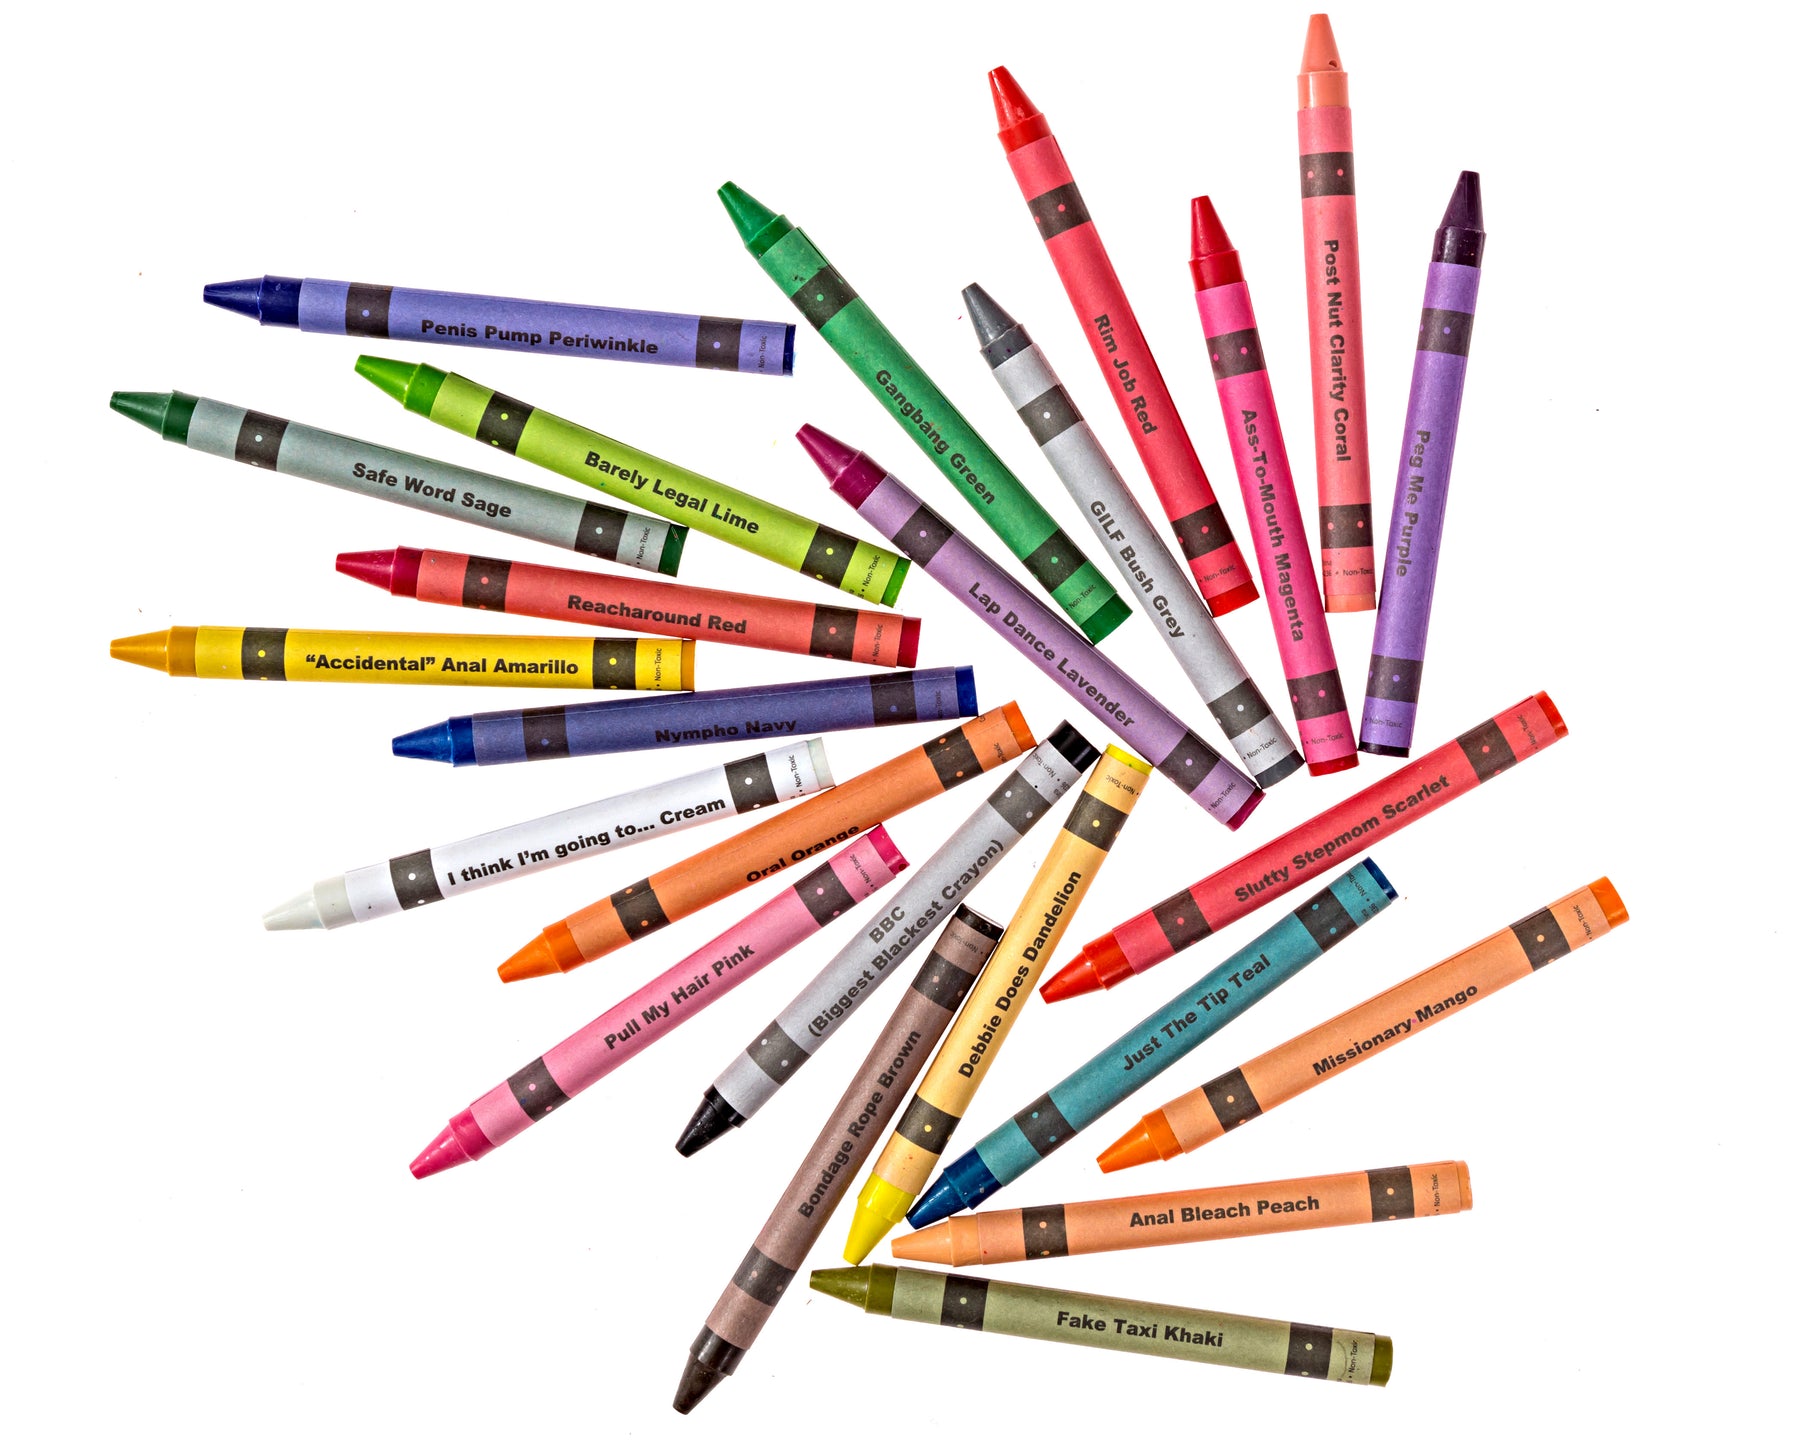 Offensive Crayons - “Red, White, and F*ck You” Edition